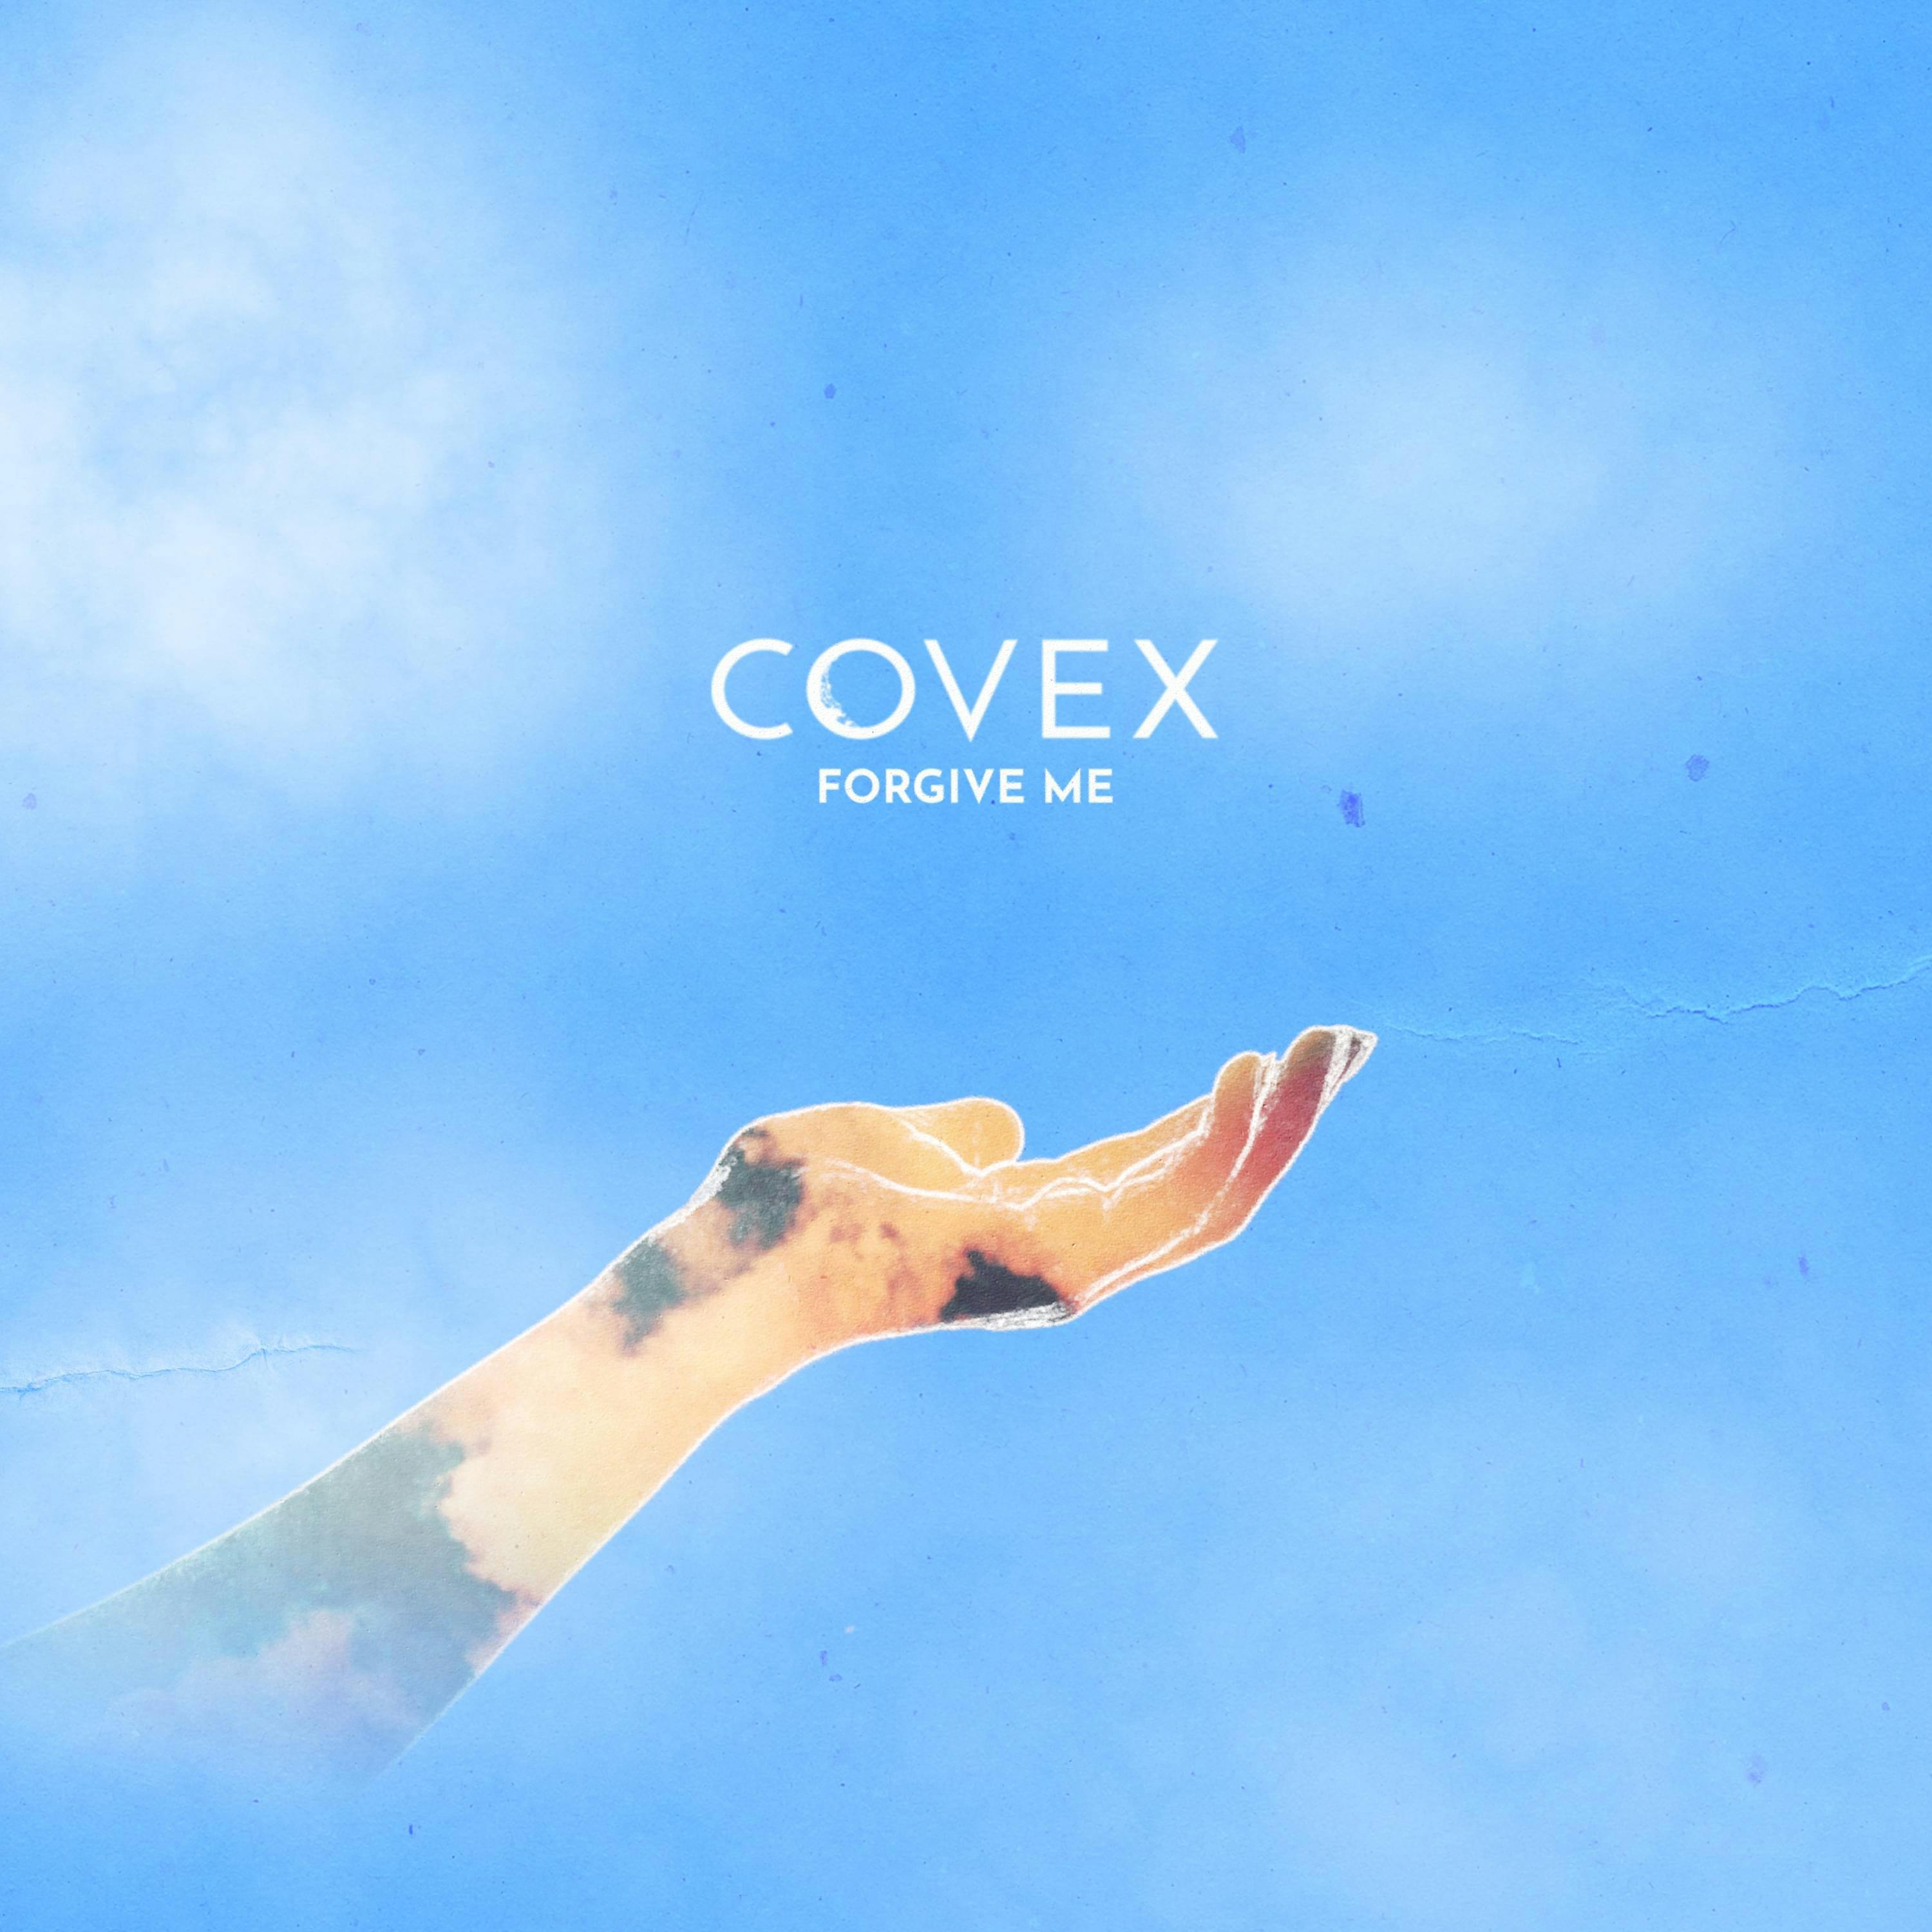 Cover art for COVEX's song: Forgive Me